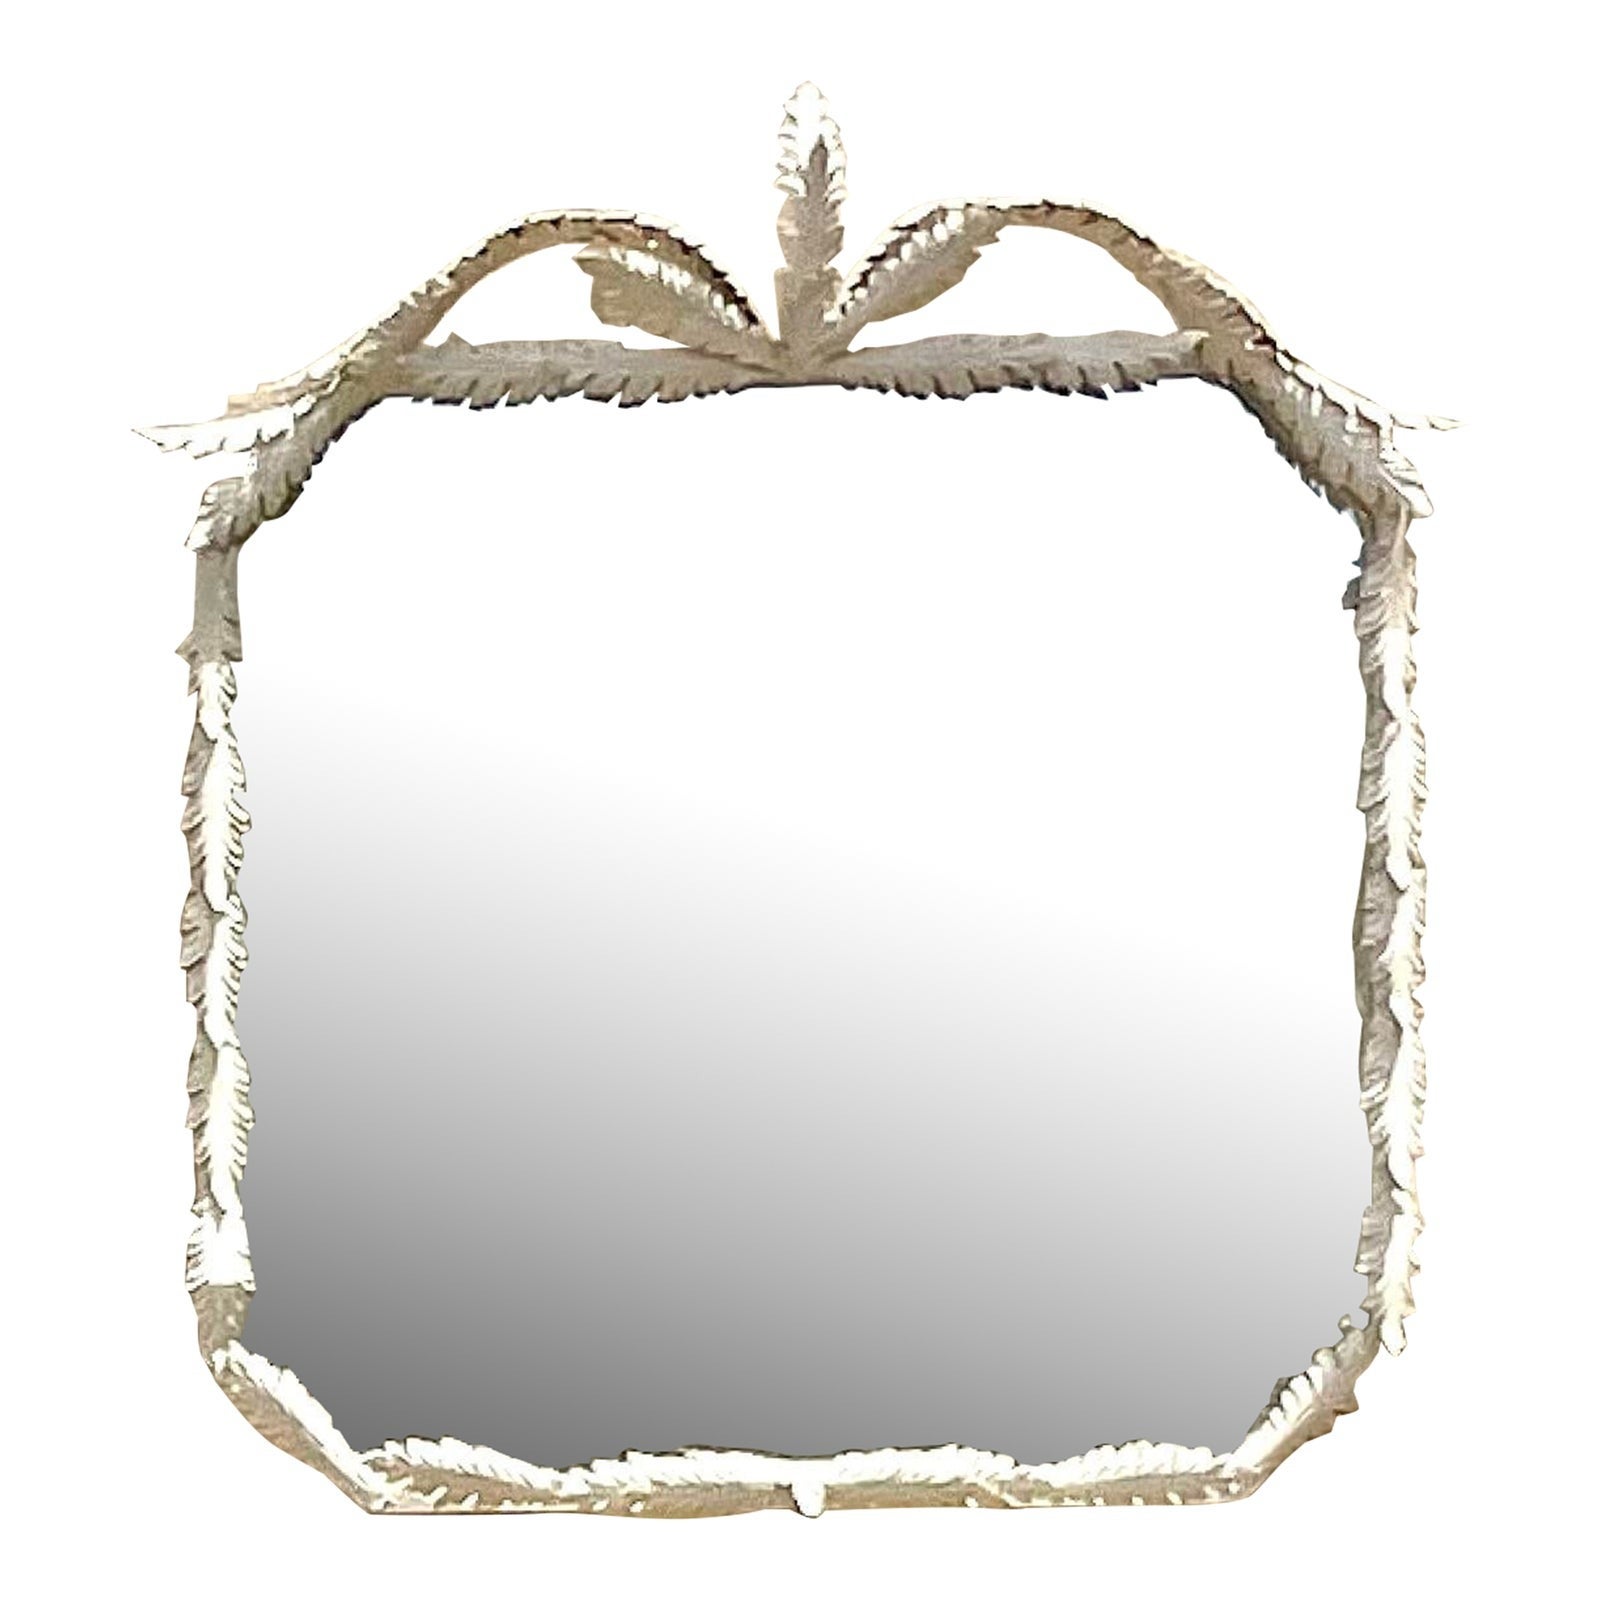 Vintage Costal Punch Cut Metal Palm Frond Mirror